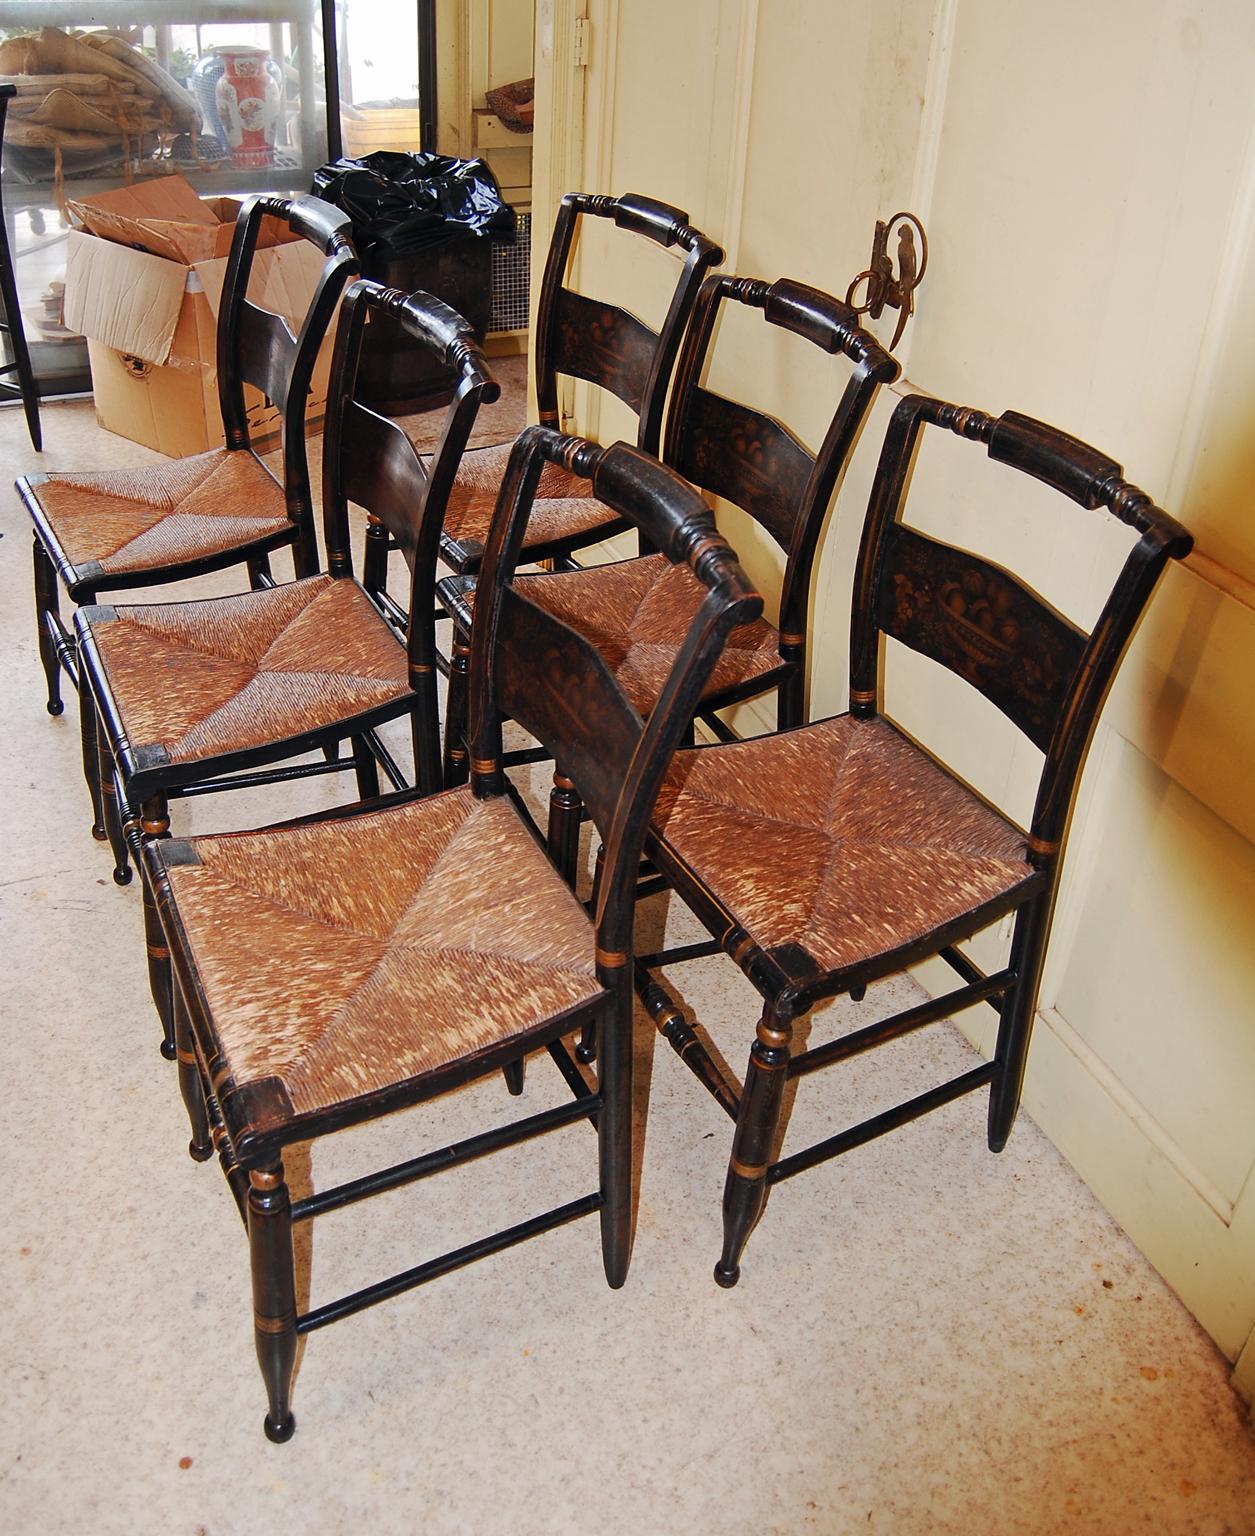 American Classical American Early 19th Century Set of Six Hitchcock Type Chairs Original Decoration